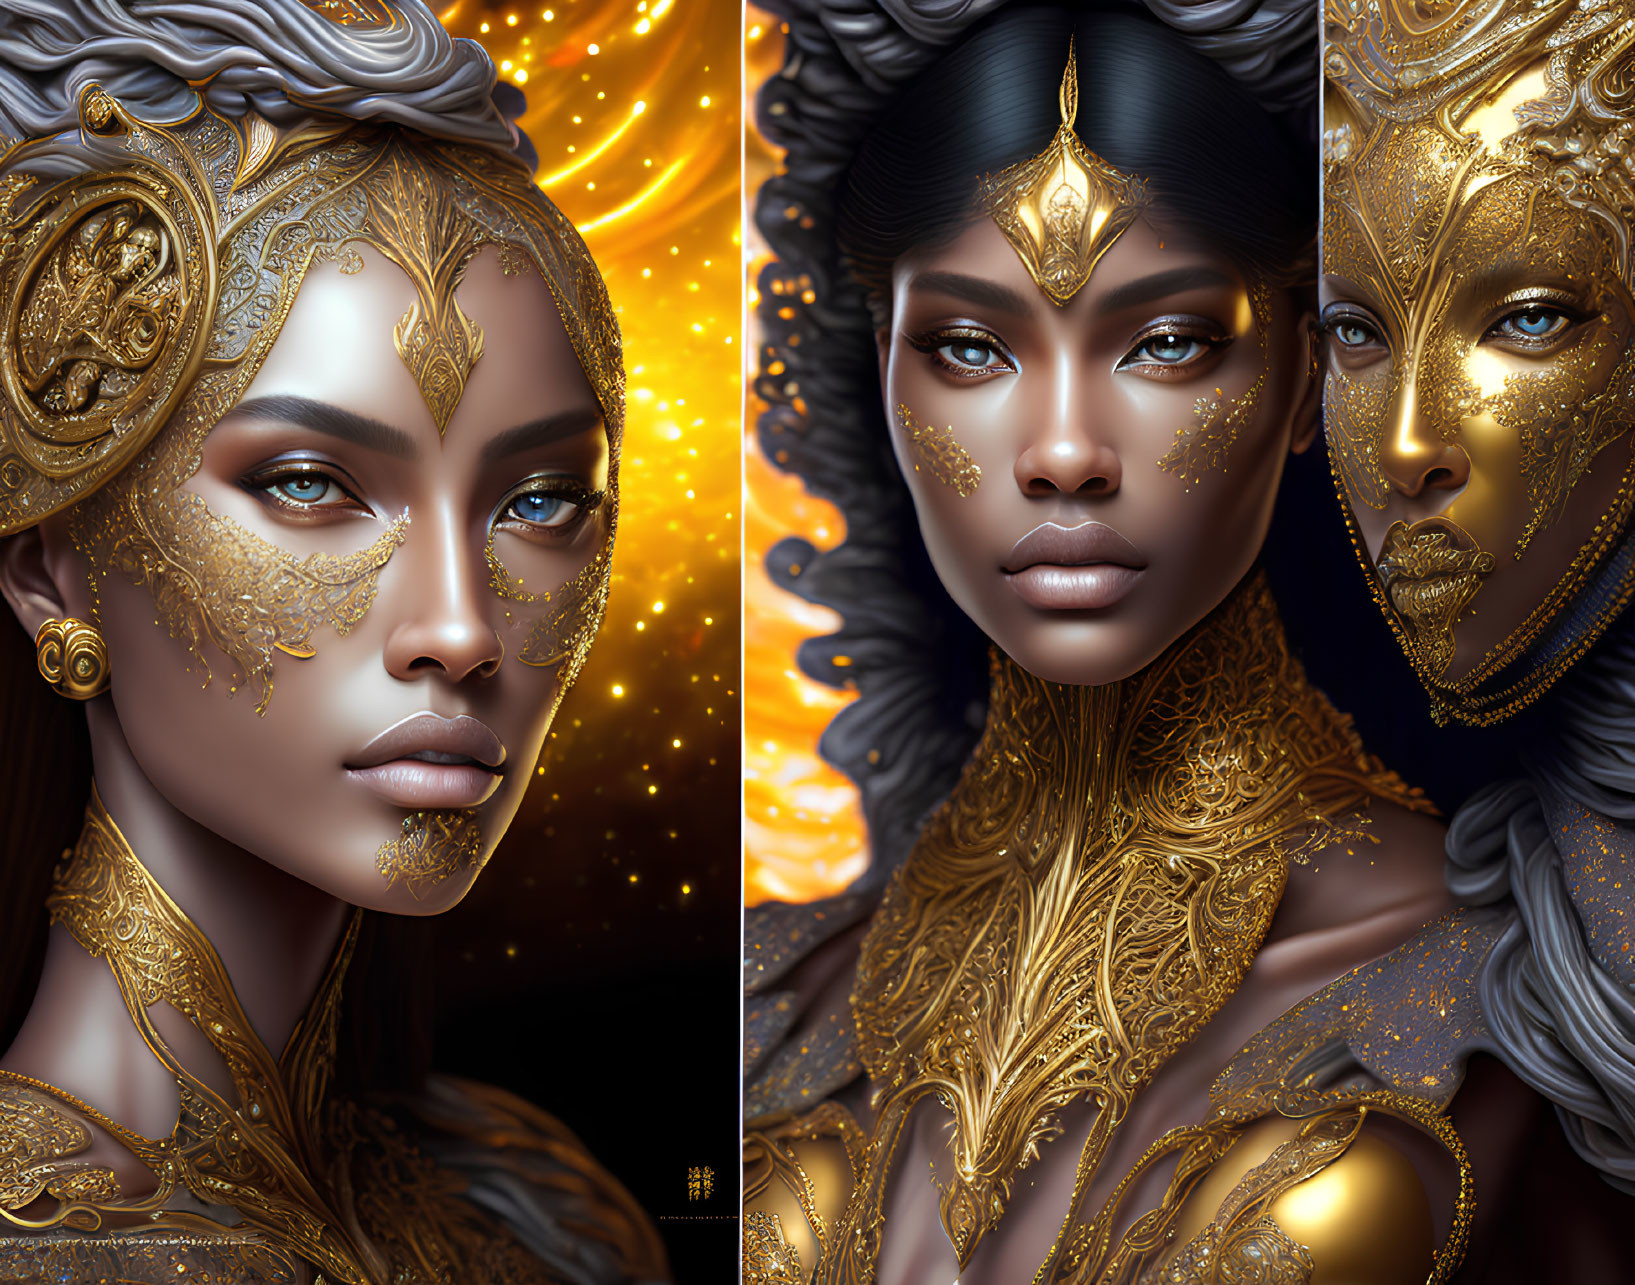 Detailed Fantasy-Style Portraits of Women with Ornate Jewelry